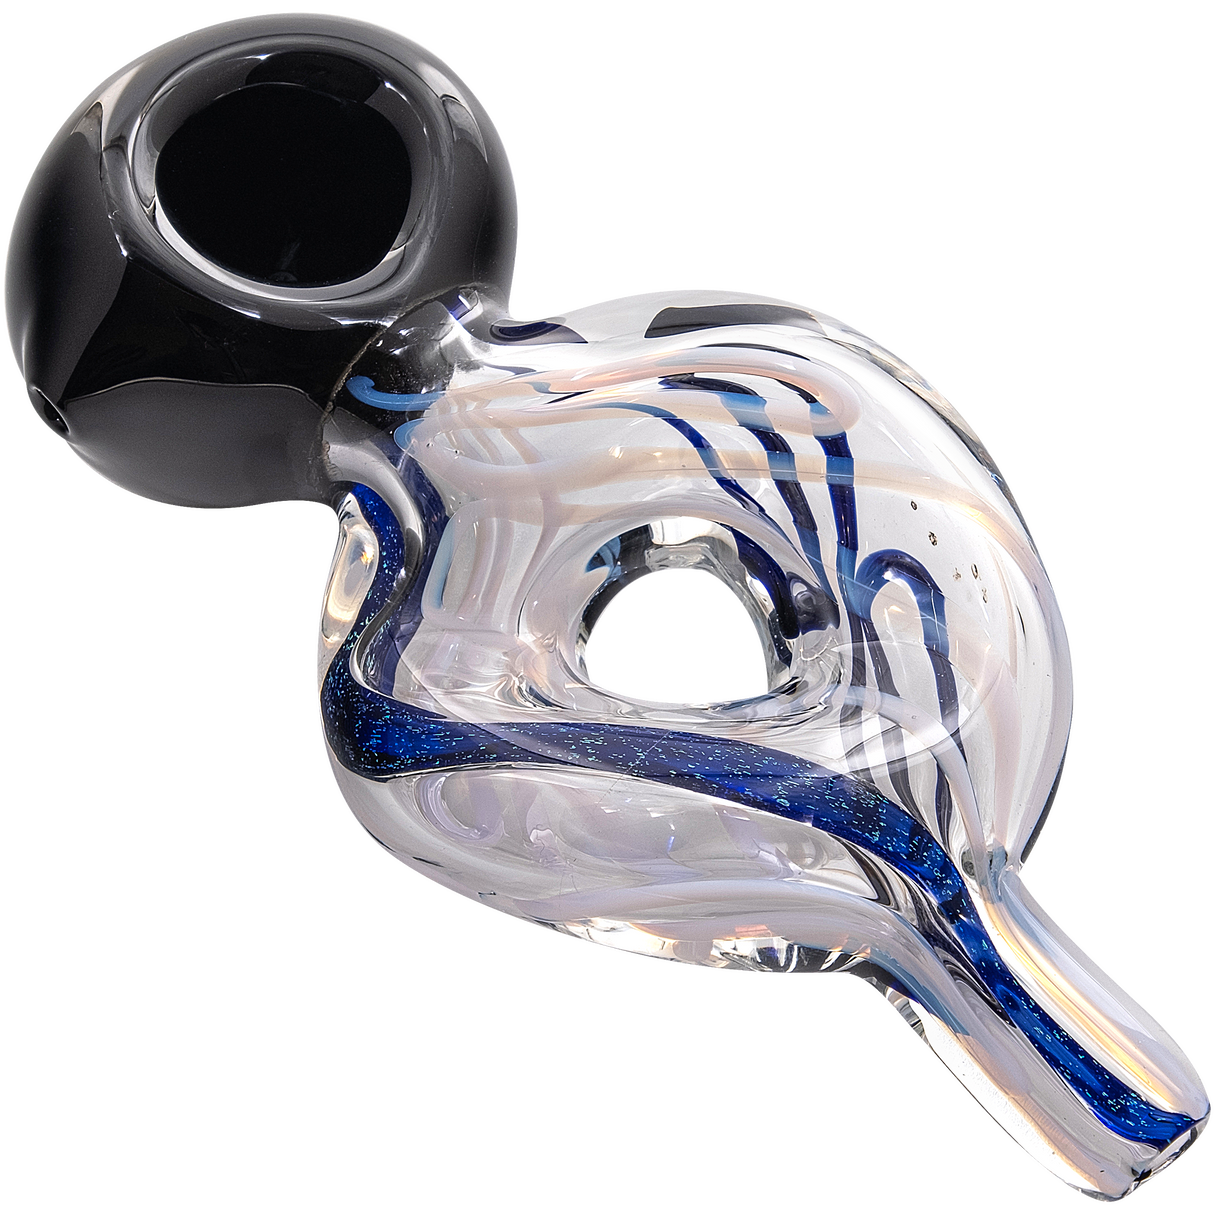 LA Pipes Dichro Donut Slime Hand-Pipe in Purple Slyme with deep bowl, side view on white